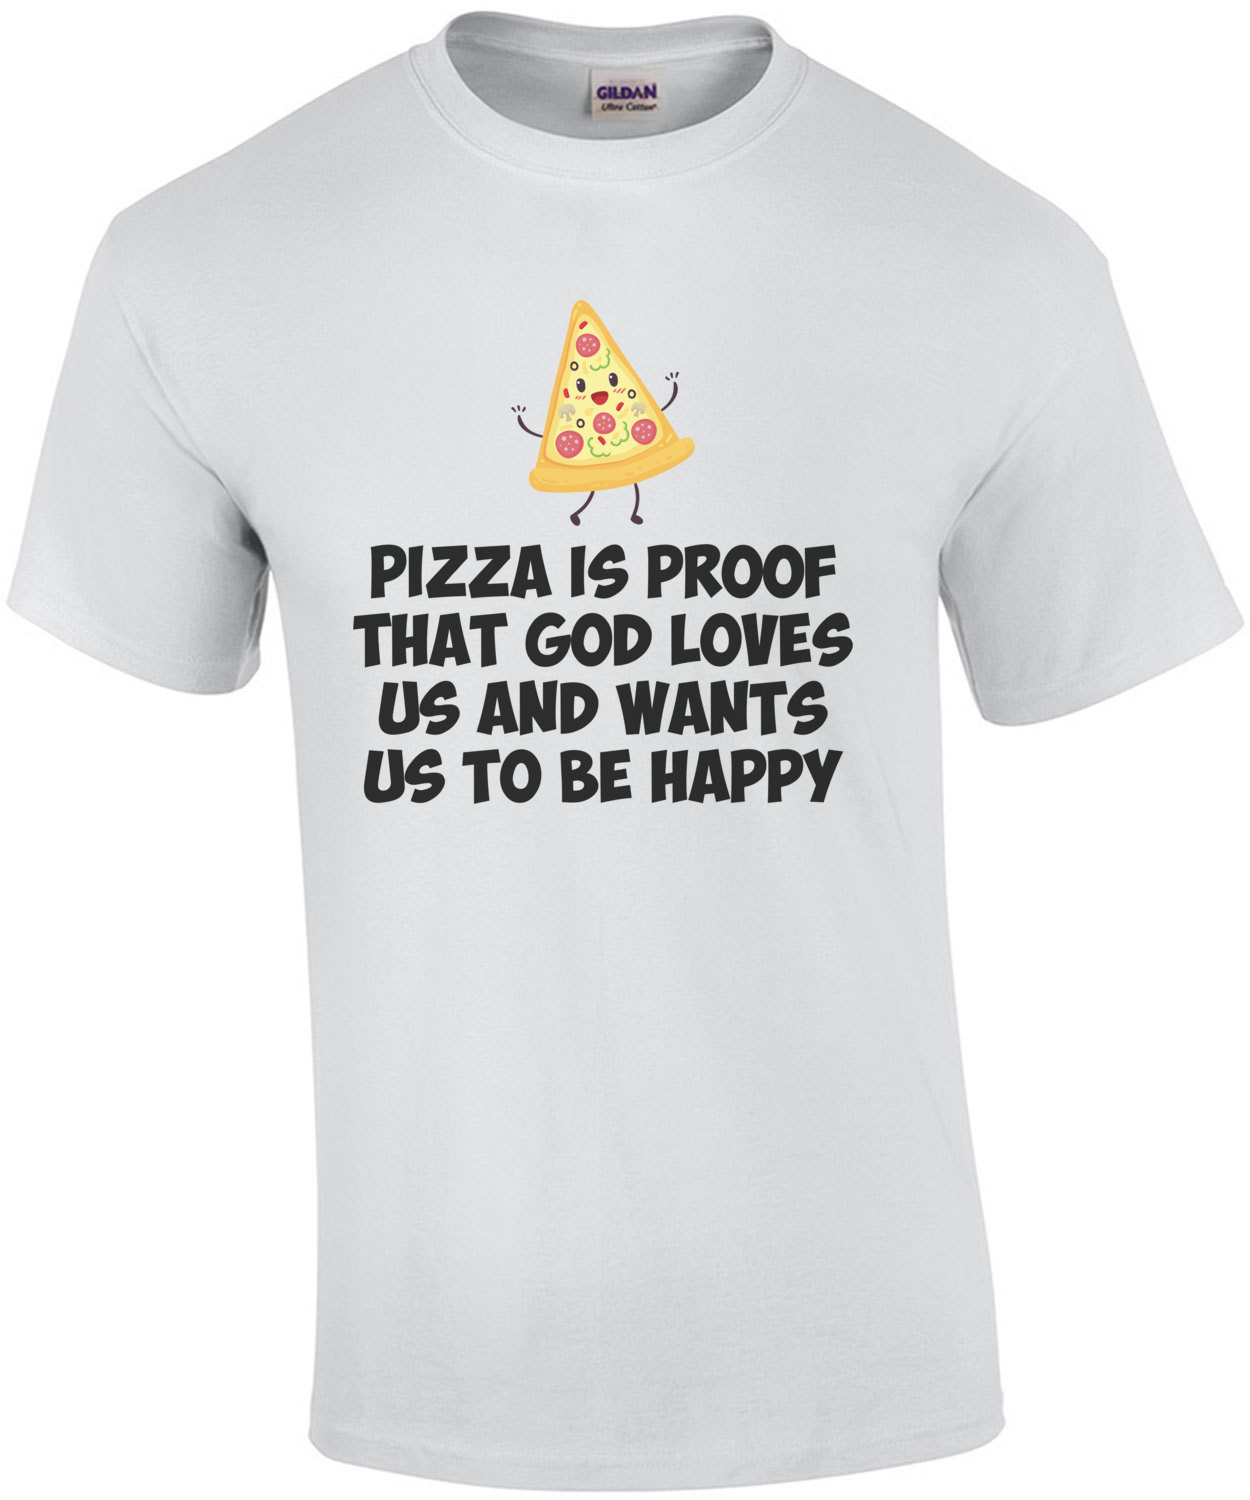 Pizza Is Proof That God Loves Us And Wants Us To Be Happy T-Shirt